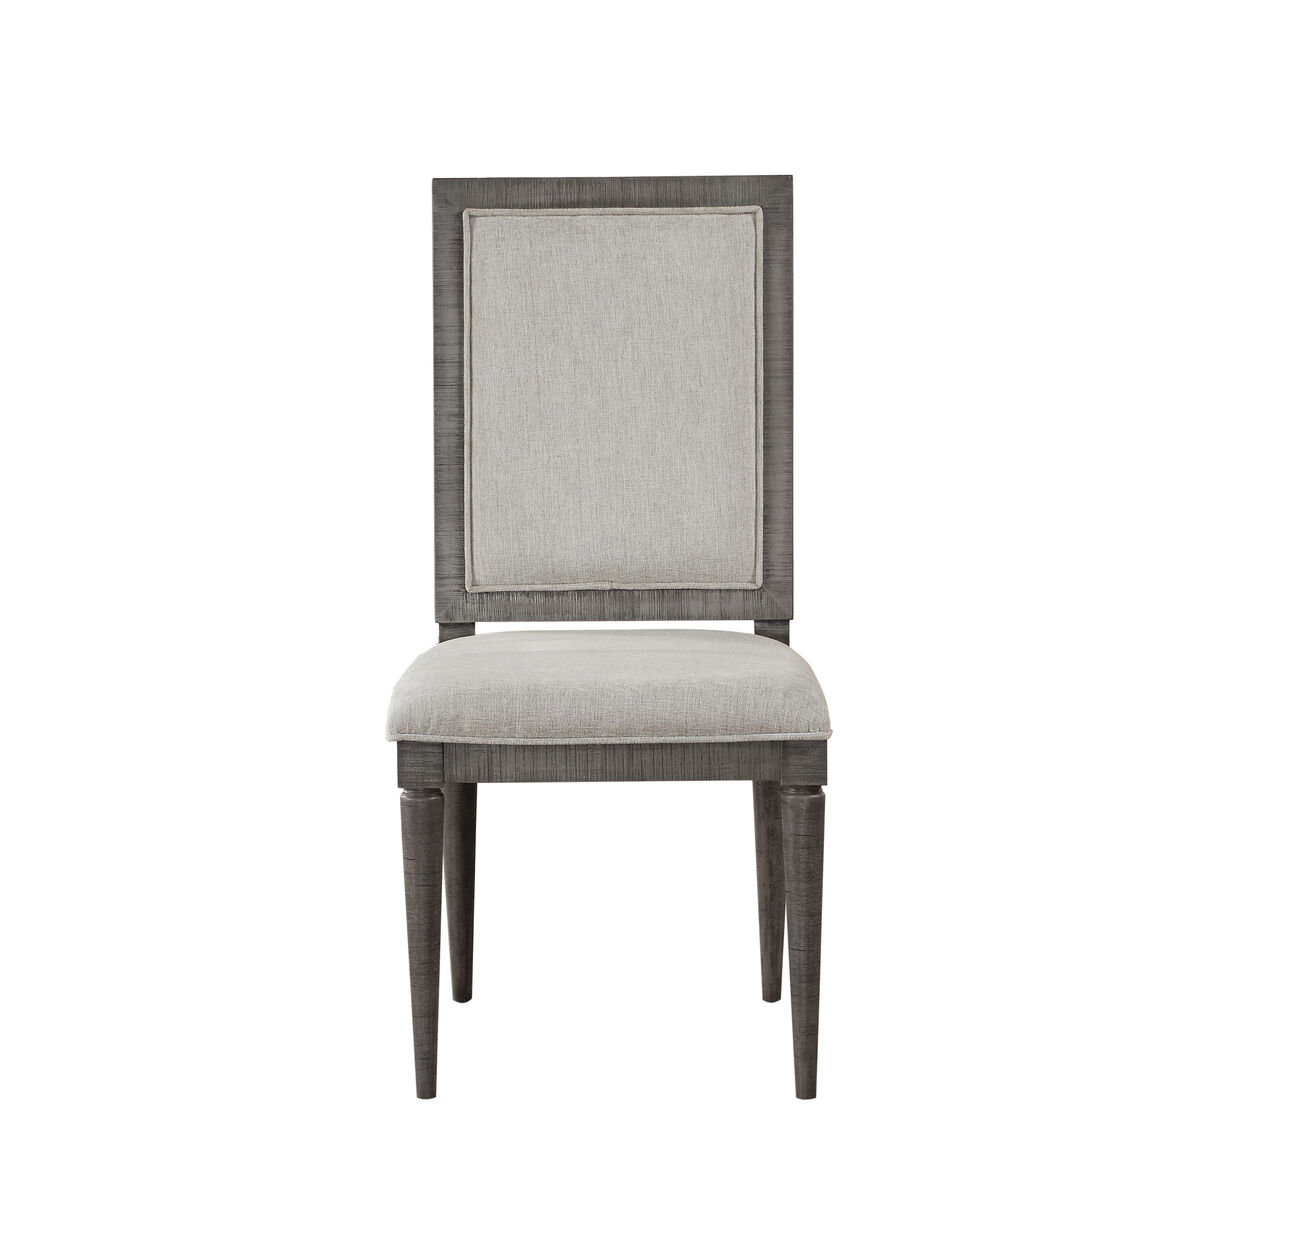 Fabric Upholstered Wooden Side Chair with Cushioned Seating and Tapered Legs, Set of 2, Gray